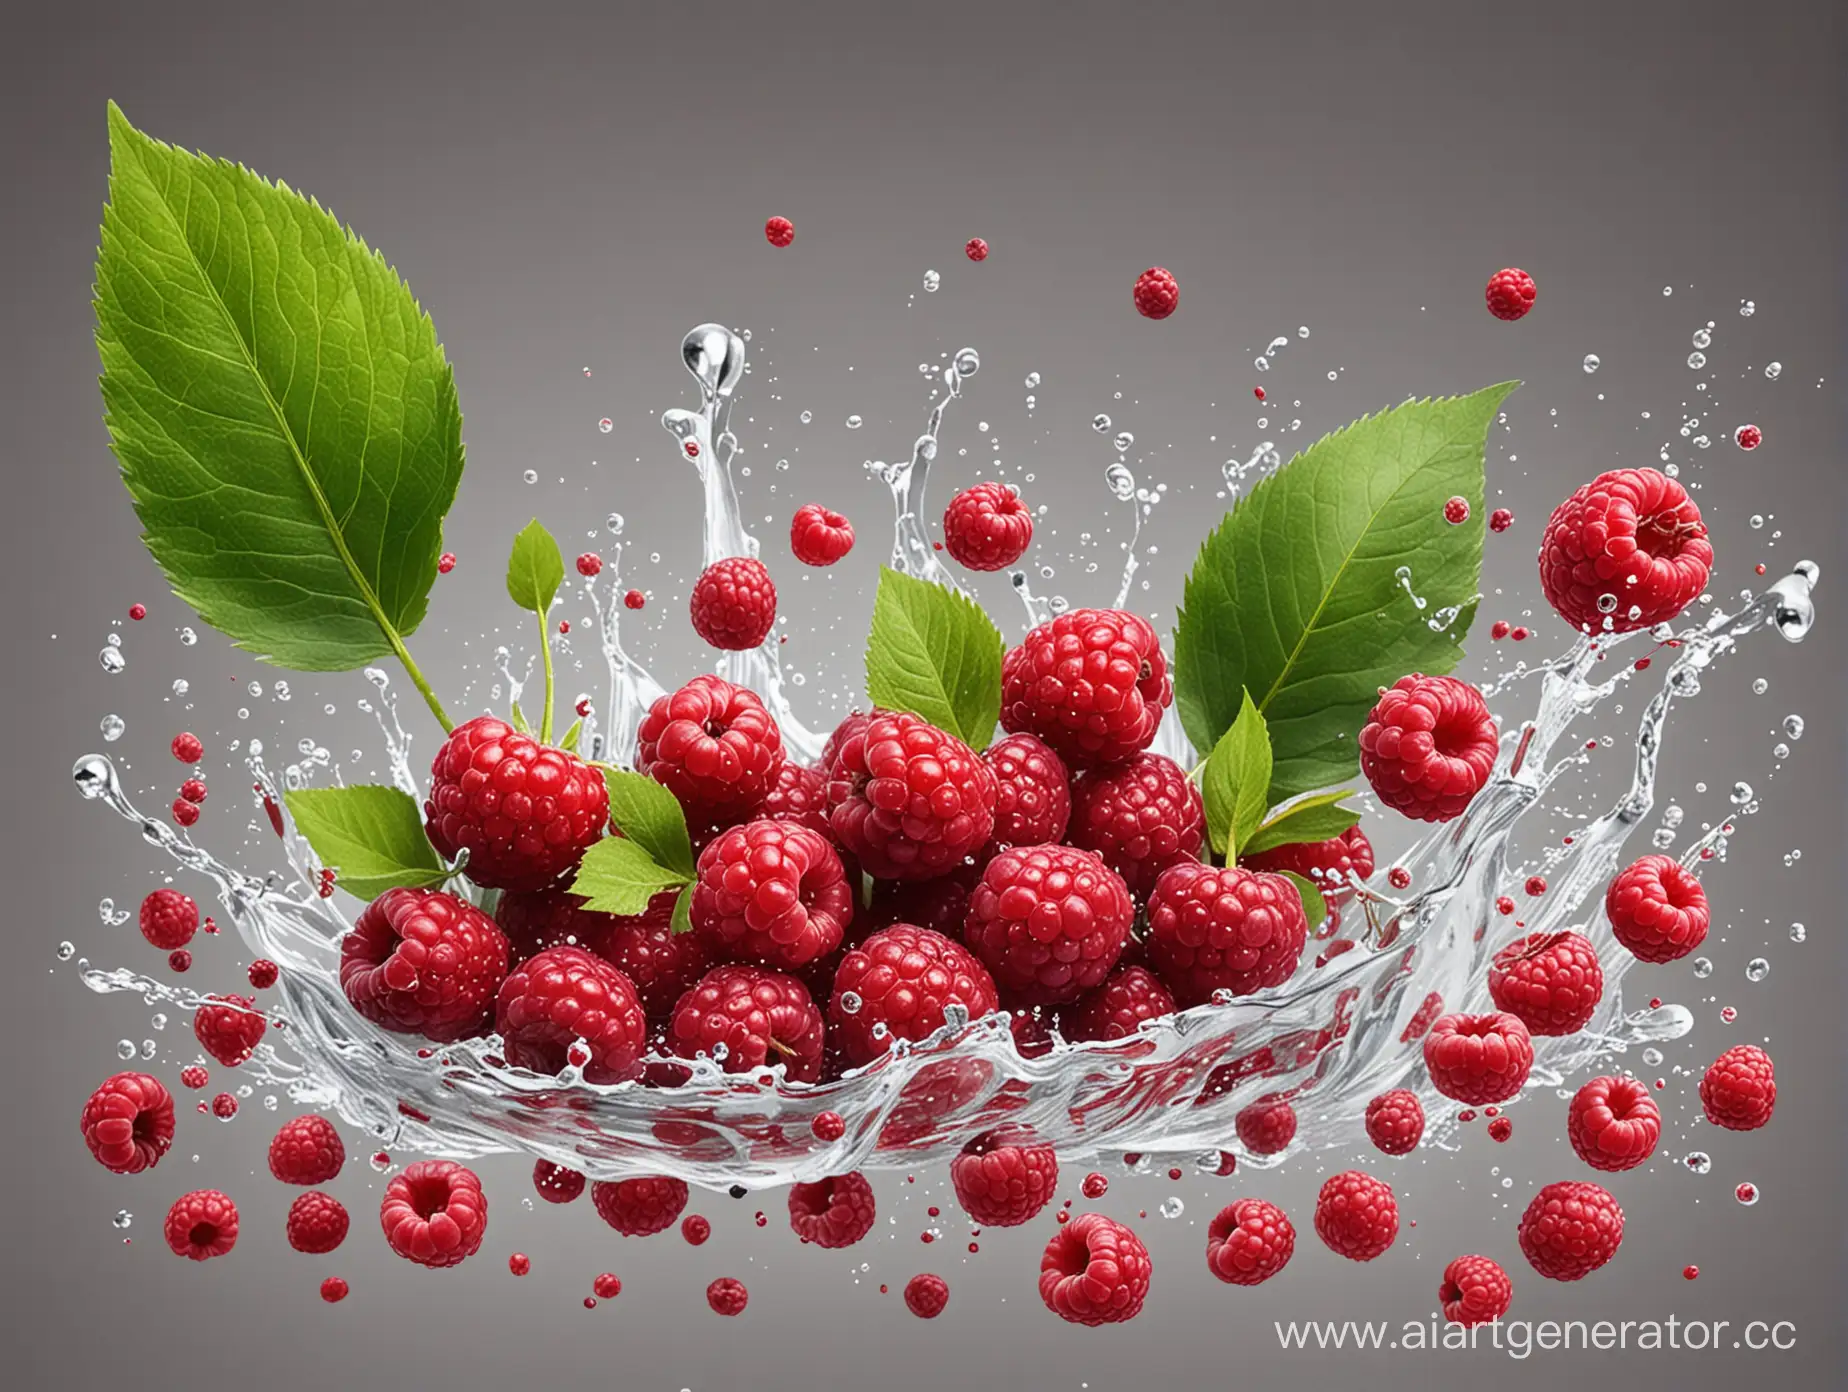 Vibrant-Berry-Splash-Cranberries-Lingonberries-and-Raspberries-with-Leaves-and-Splashes